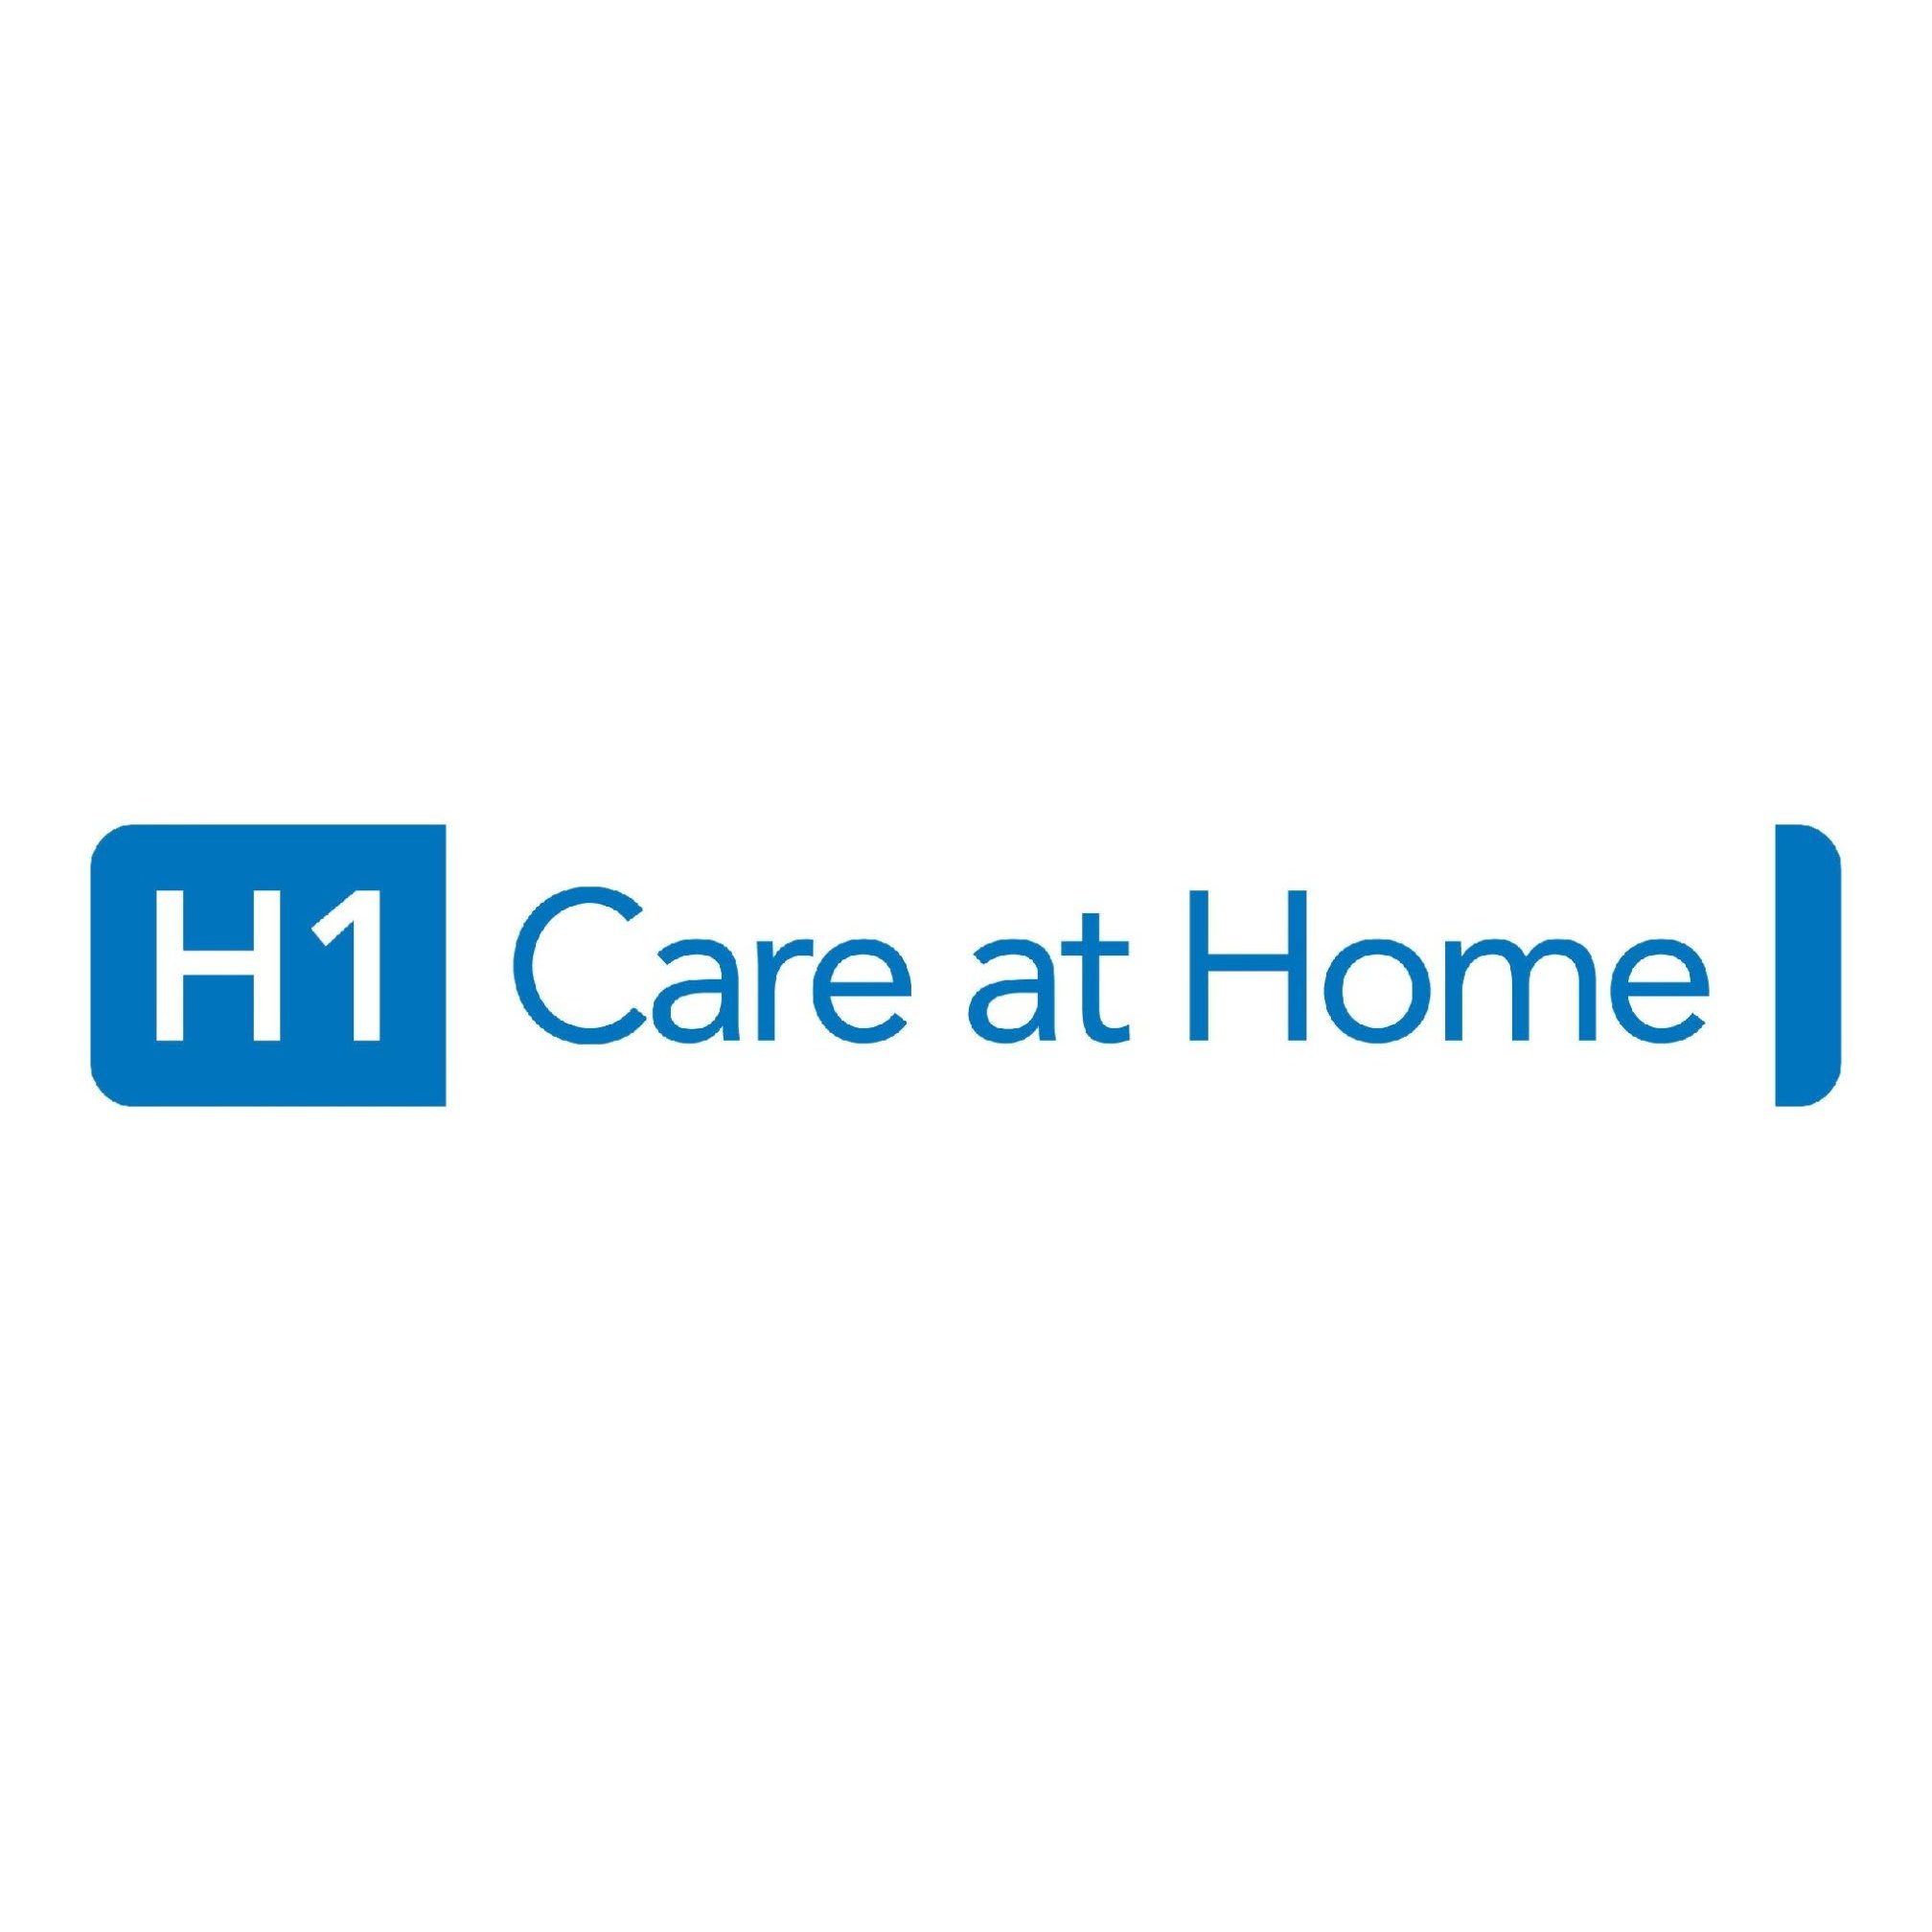 LOGO H 1 Care At Home Forres 01309 250609